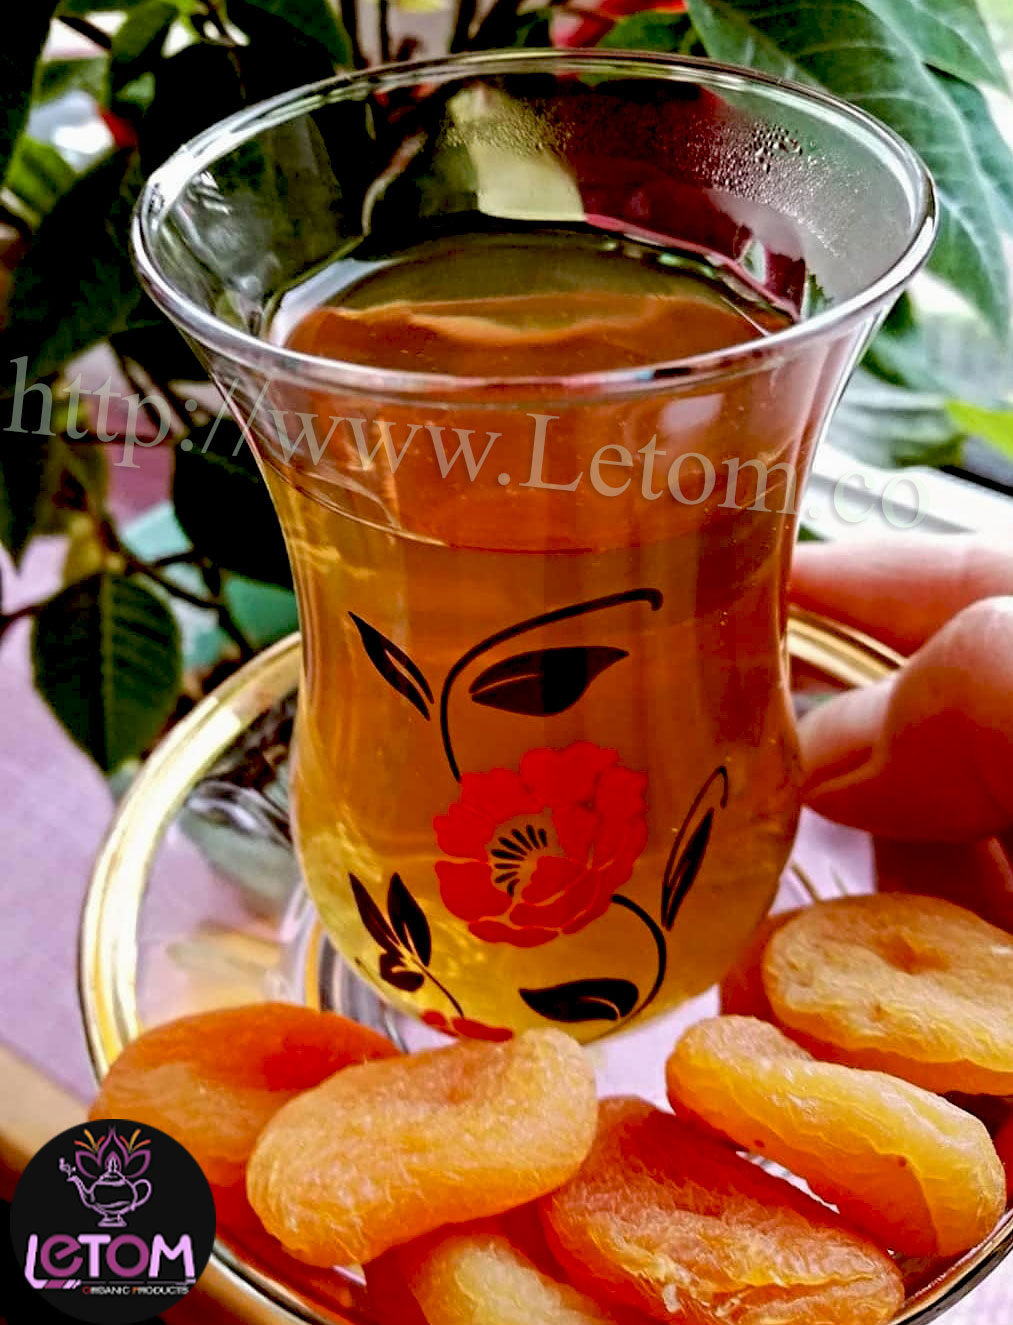 apricots next to a cup of black tea